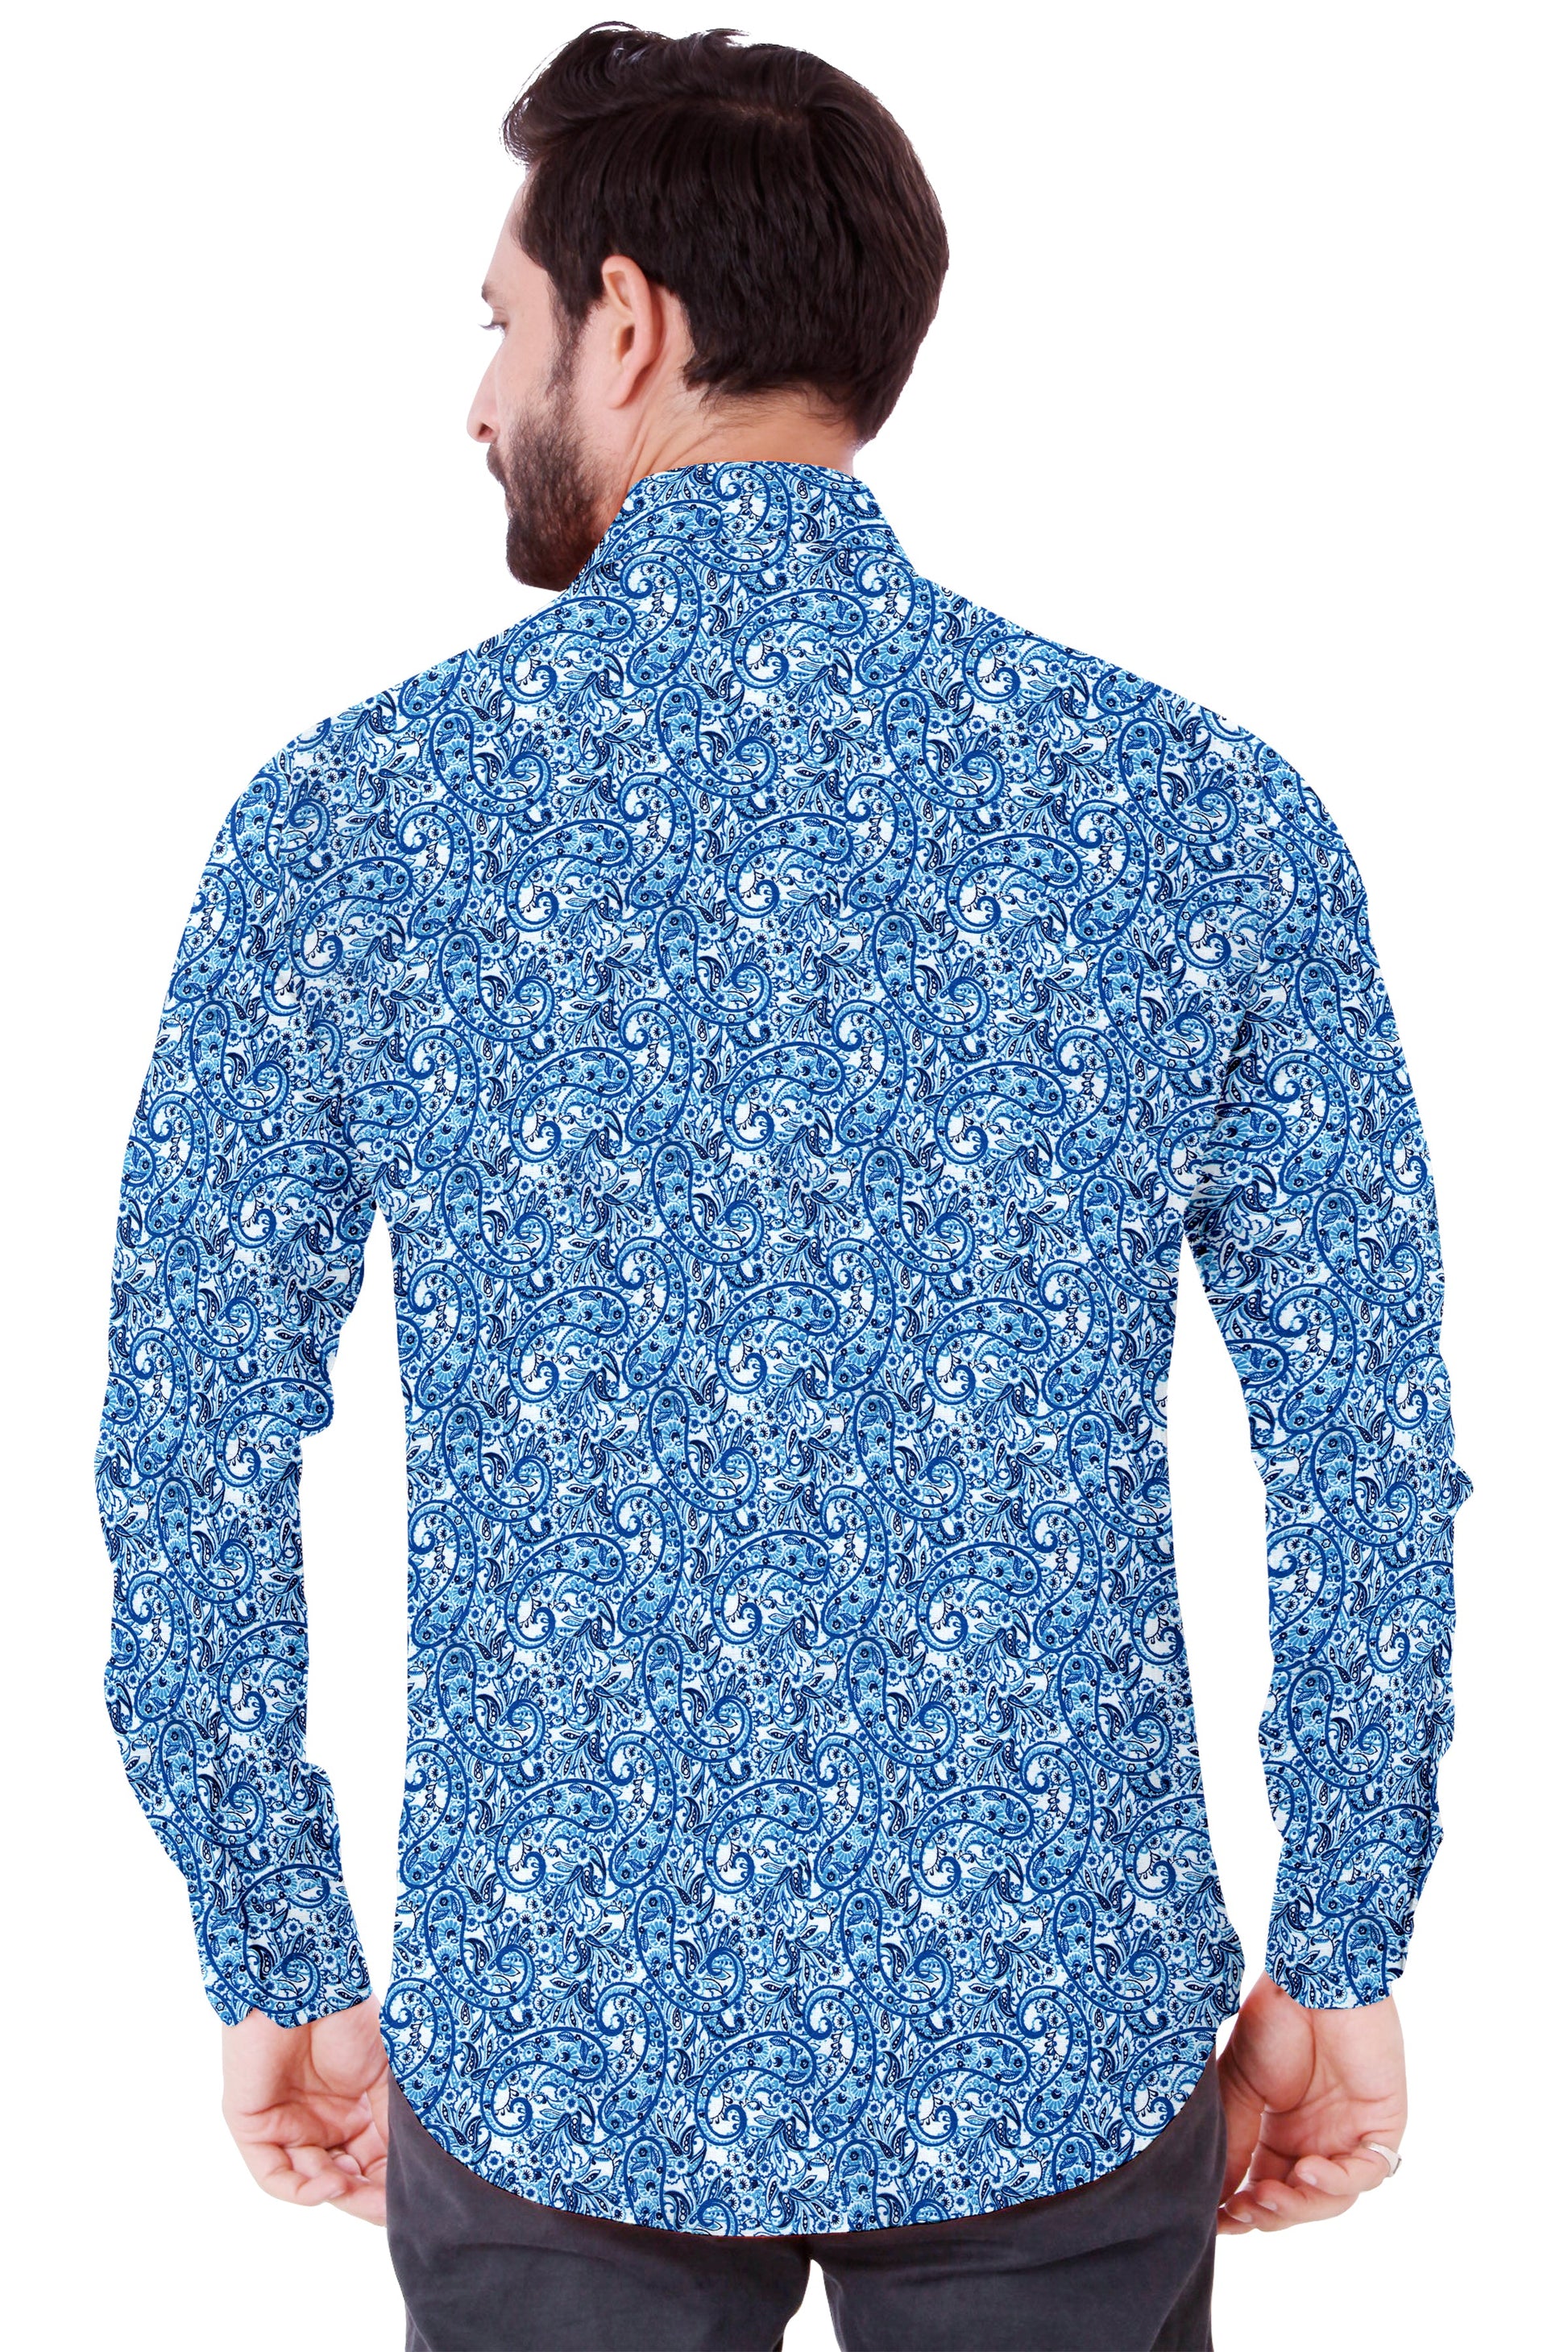 Men's Blue Printed Casual Full Sleeves 100% Cotton - Styleflea